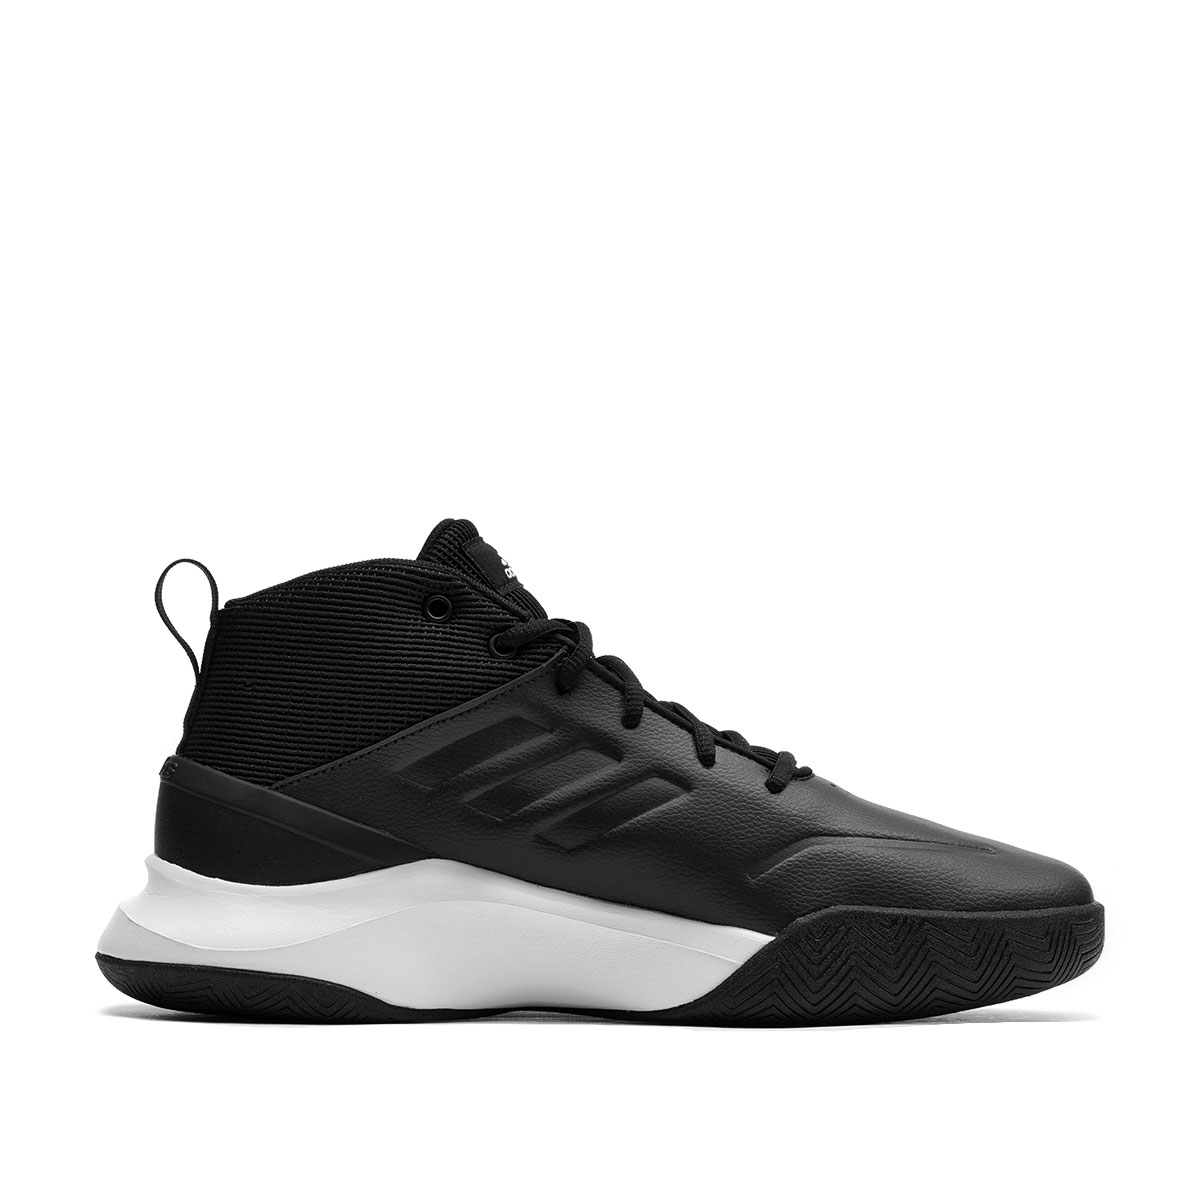 adidas Ownthegame  FY6007